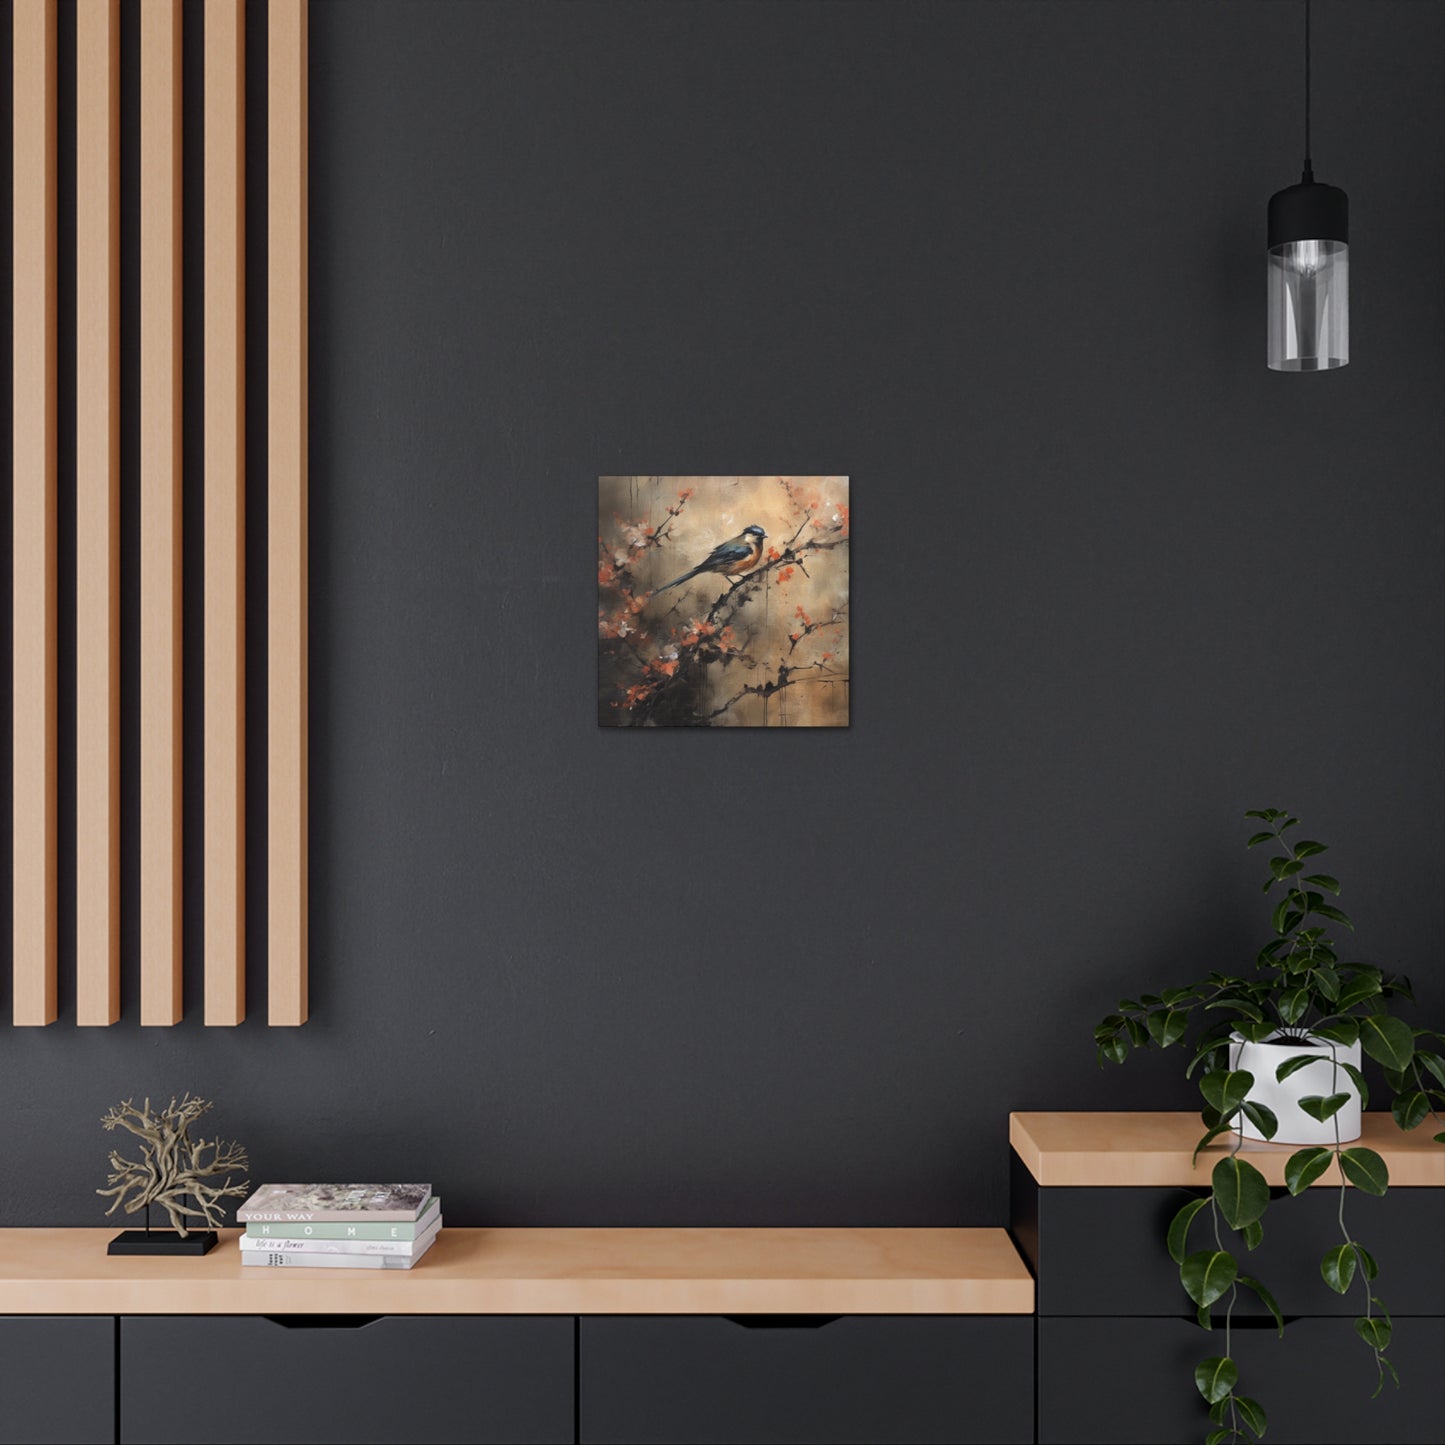 "Bird In Nature Wabi Sabi" Wall Art - Weave Got Gifts - Unique Gifts You Won’t Find Anywhere Else!